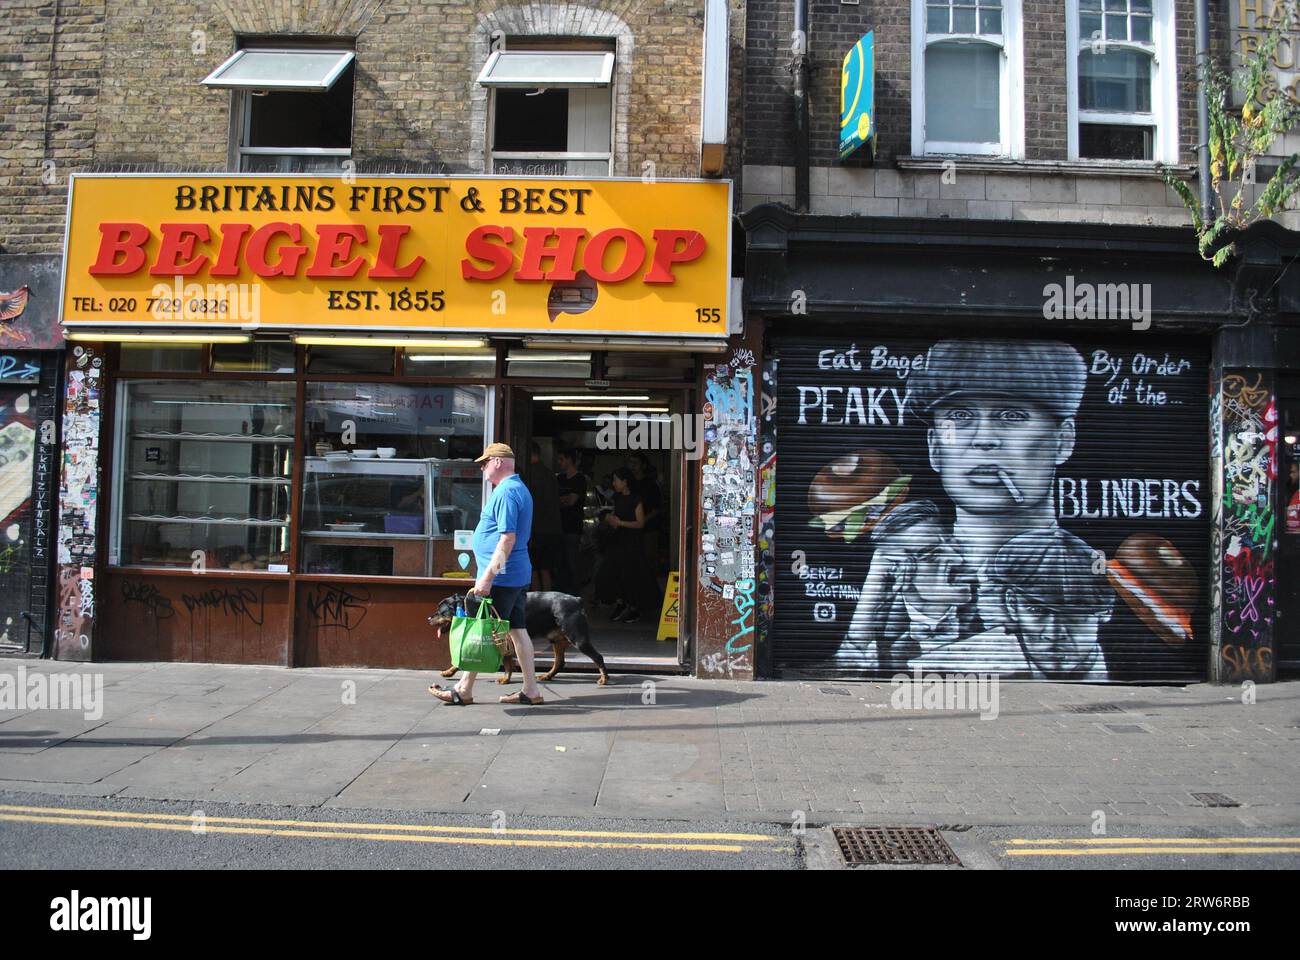 Image of Brick Lane featuring the world famous bagel shop established in 1855 and some street art of Peaky Blinders on the shutters next door. Stock Photo